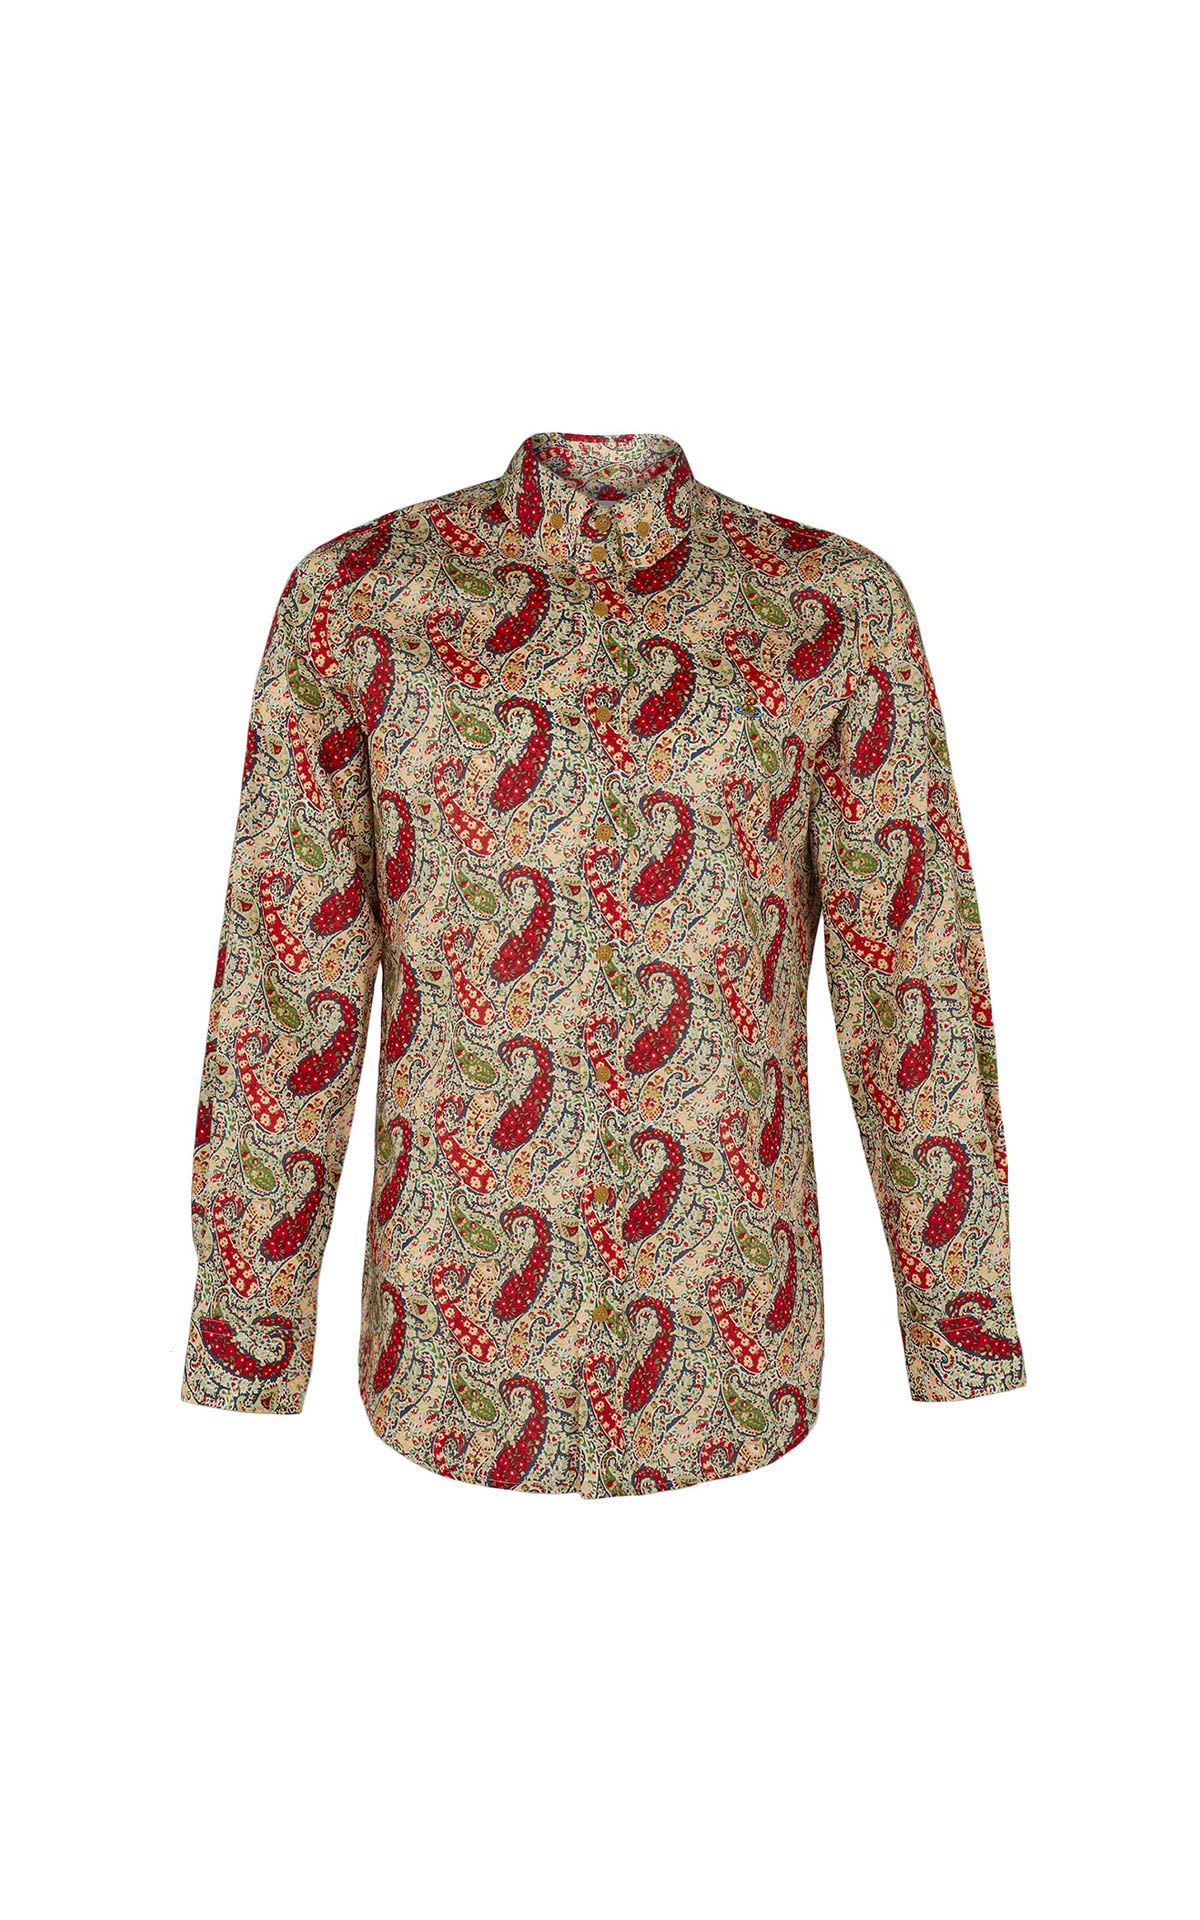 Vivienne Westwood Two button krall shirt from Bicester Village